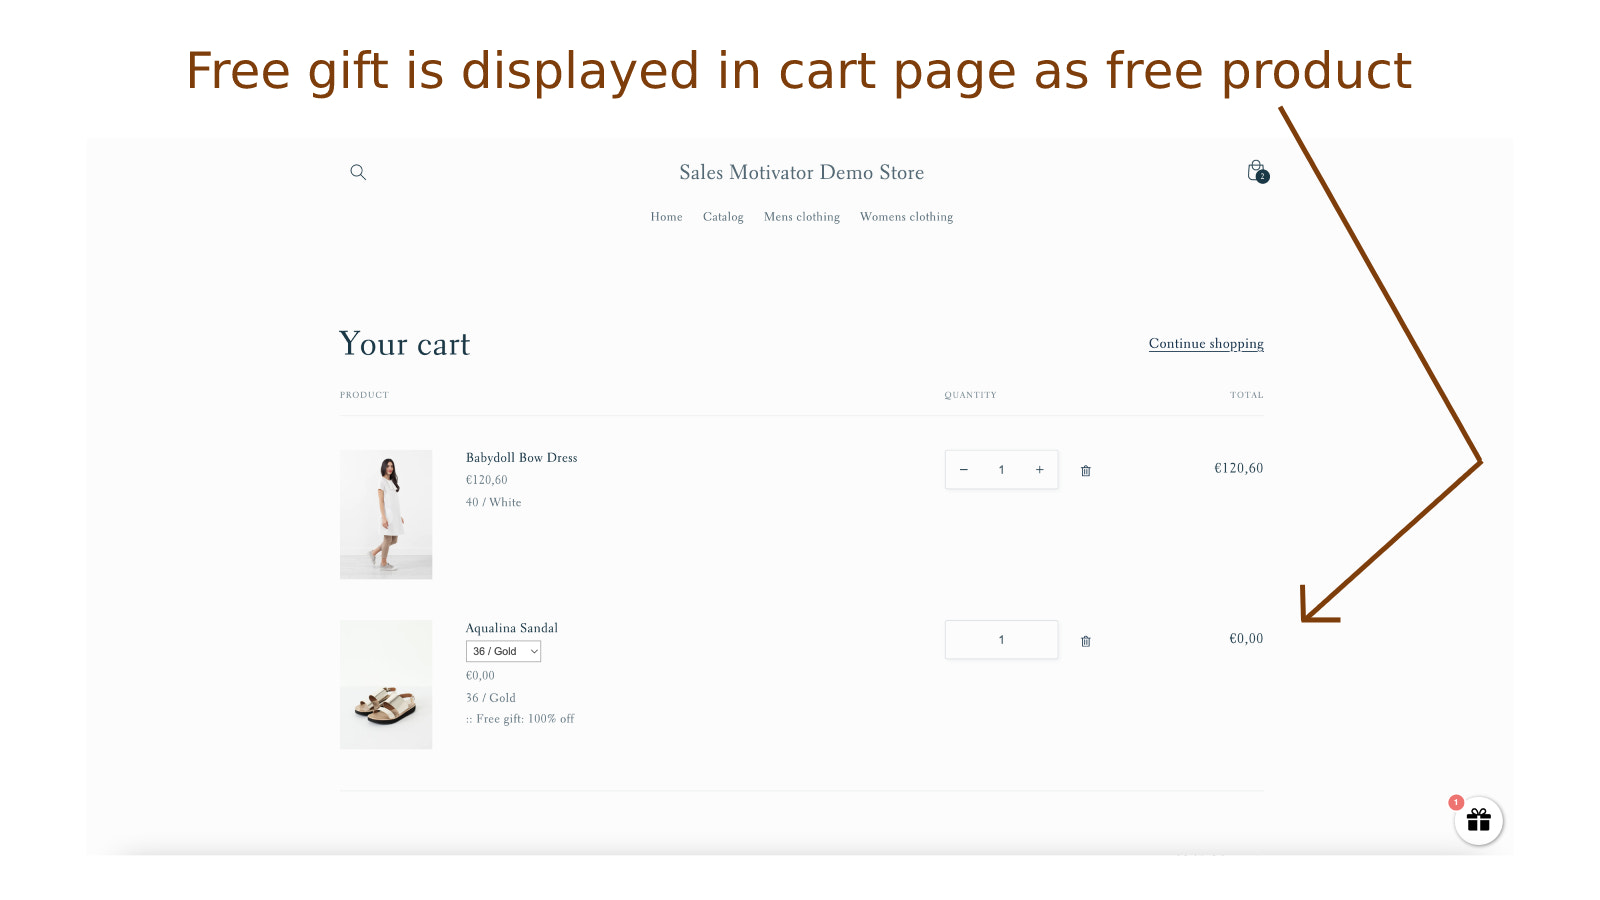 Free gifts are displayed in cart page as free products